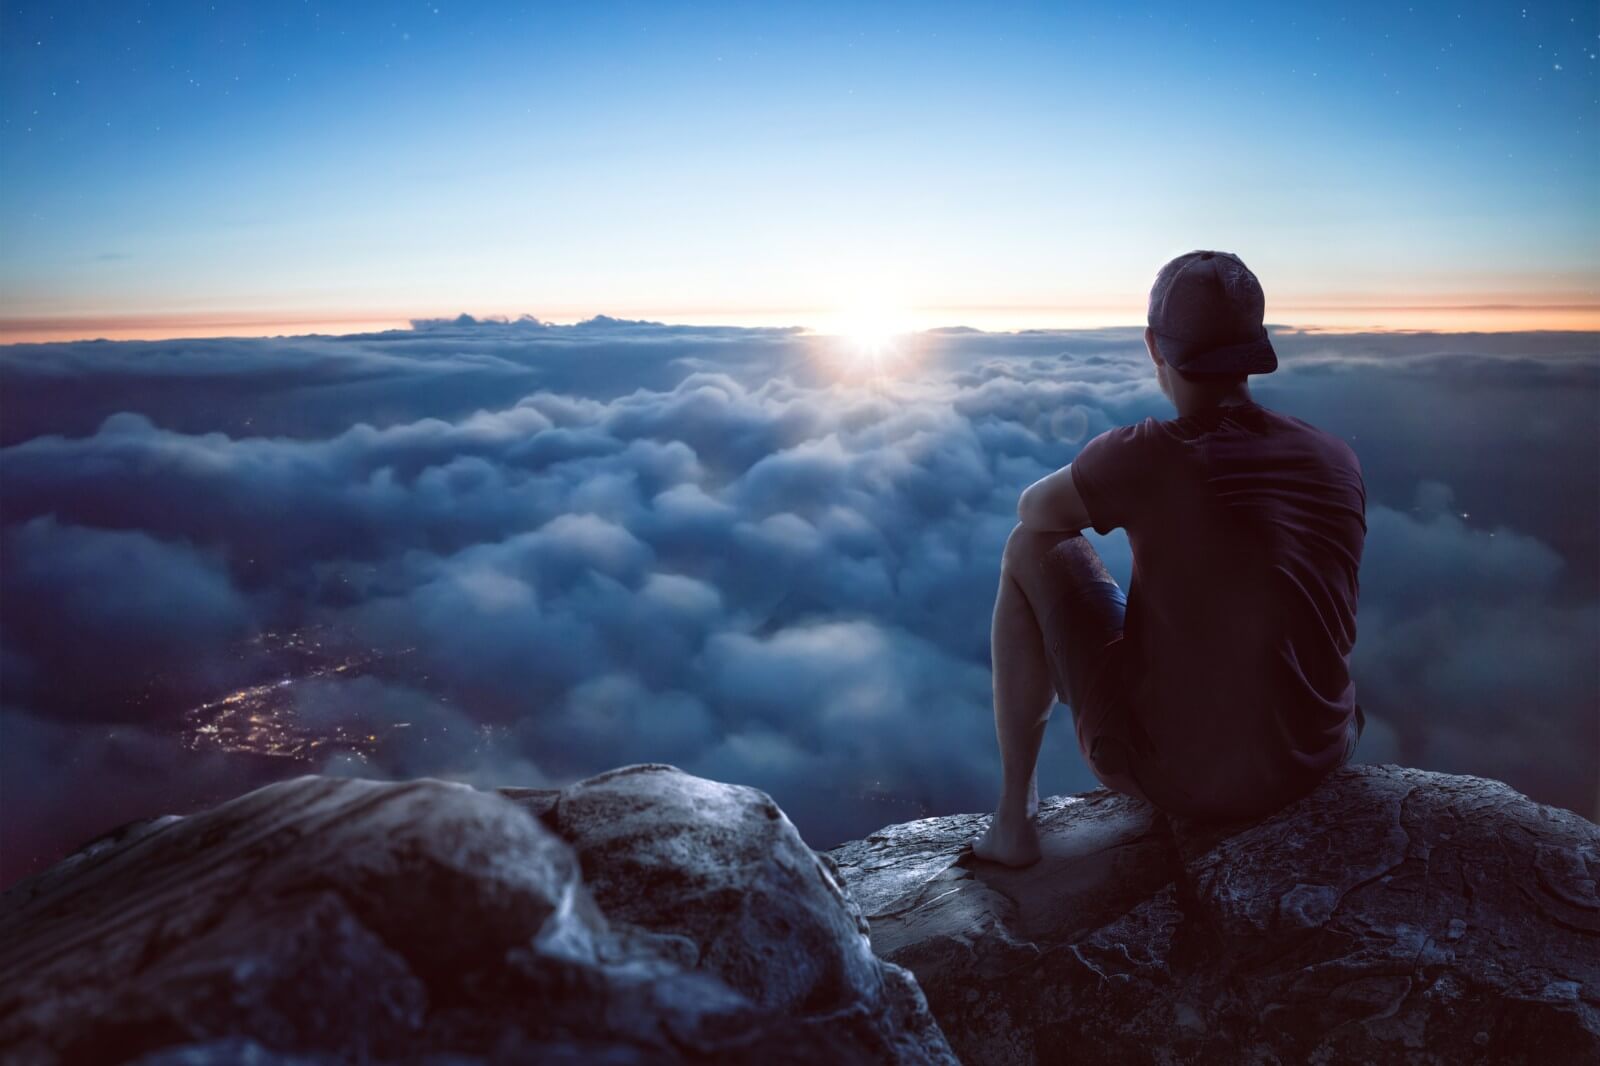 A young man is sitting on a rock on a summit overlooking a vast ocean of clouds. The sun is low and it is dark around him. Through the clouds you can see the lights of a city underneath.